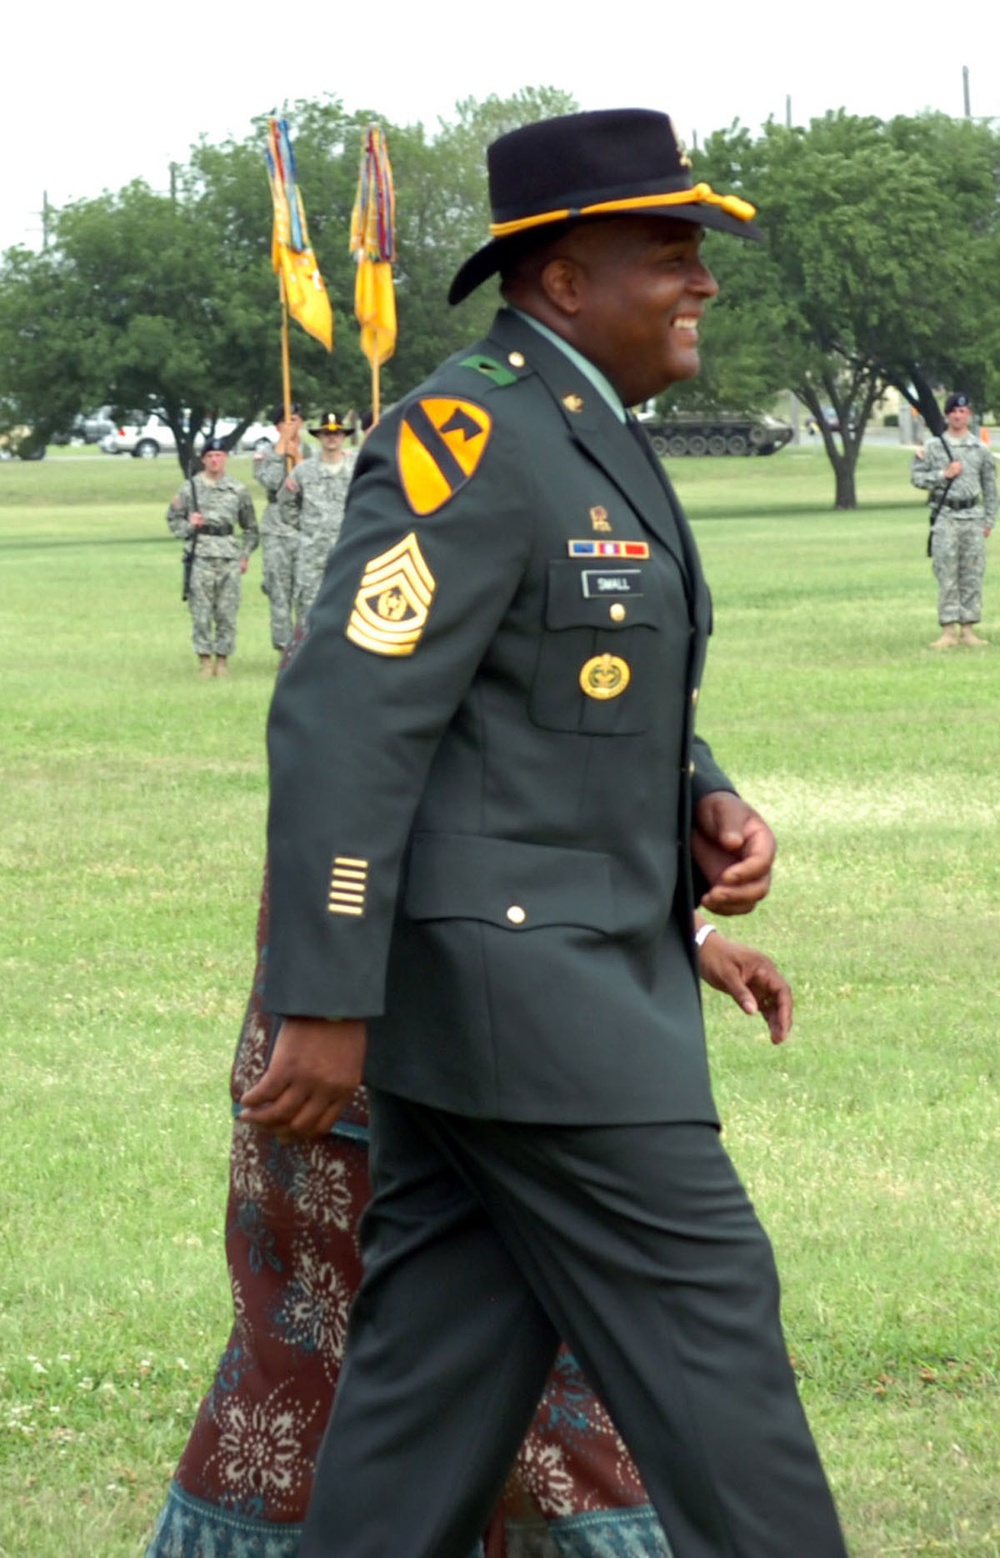 End of the Trail for Top Ironhorse Trooper - Command Sergeant Major Stanley D. Small Retires After 30 Years of Service